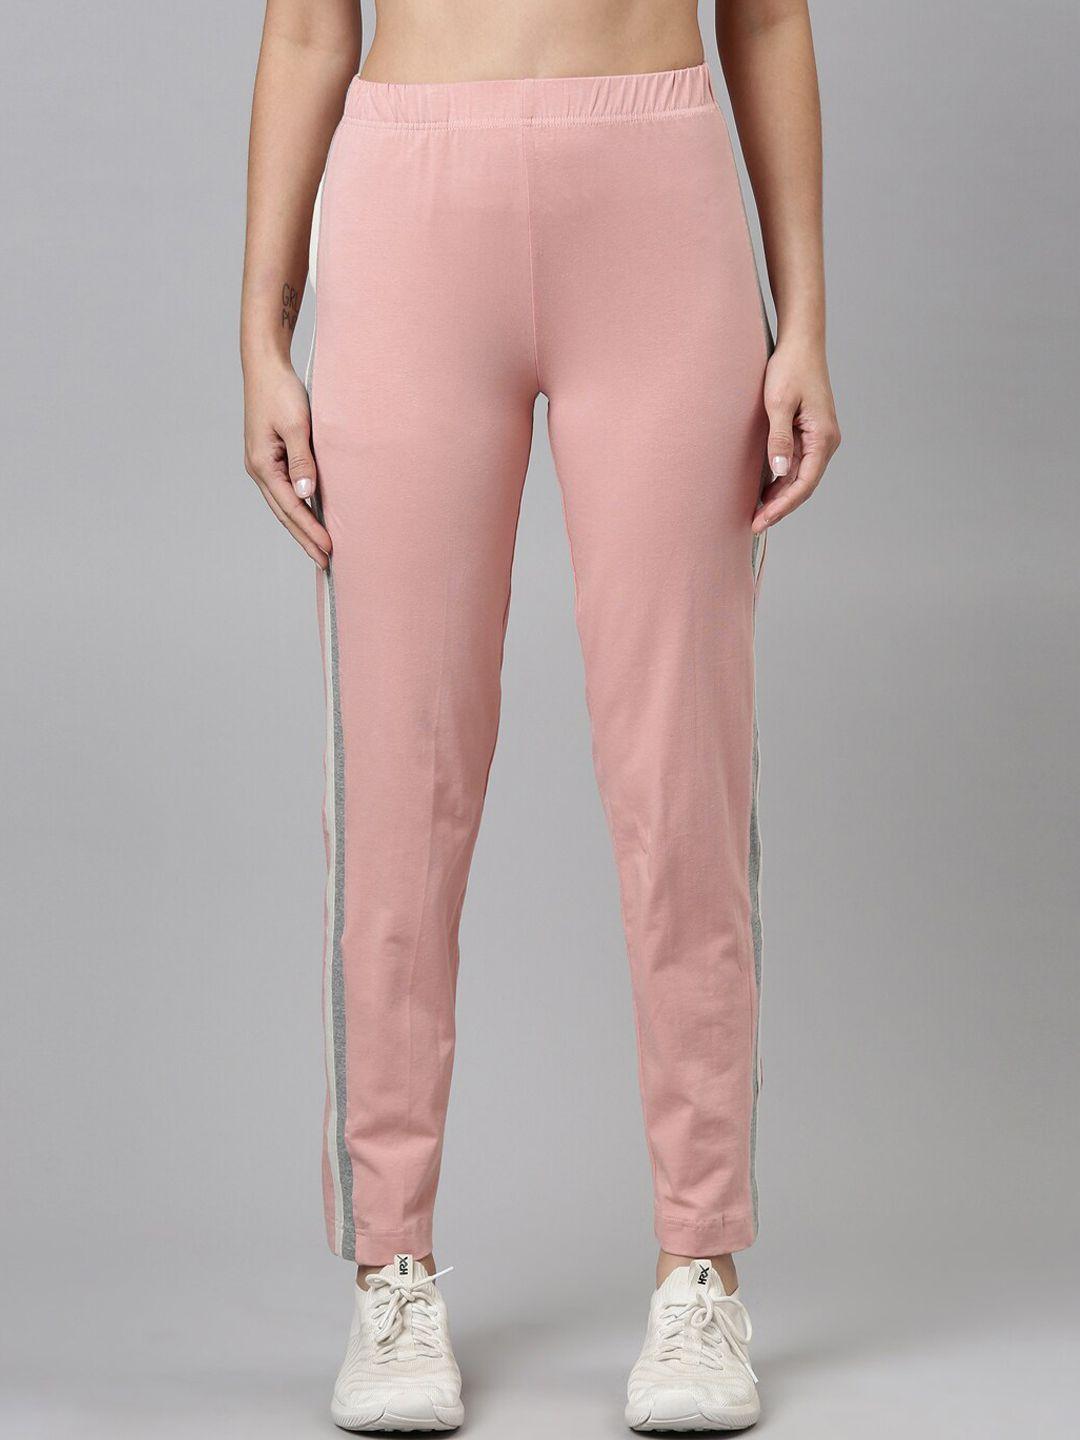 go colors women pink solid side striped track pants